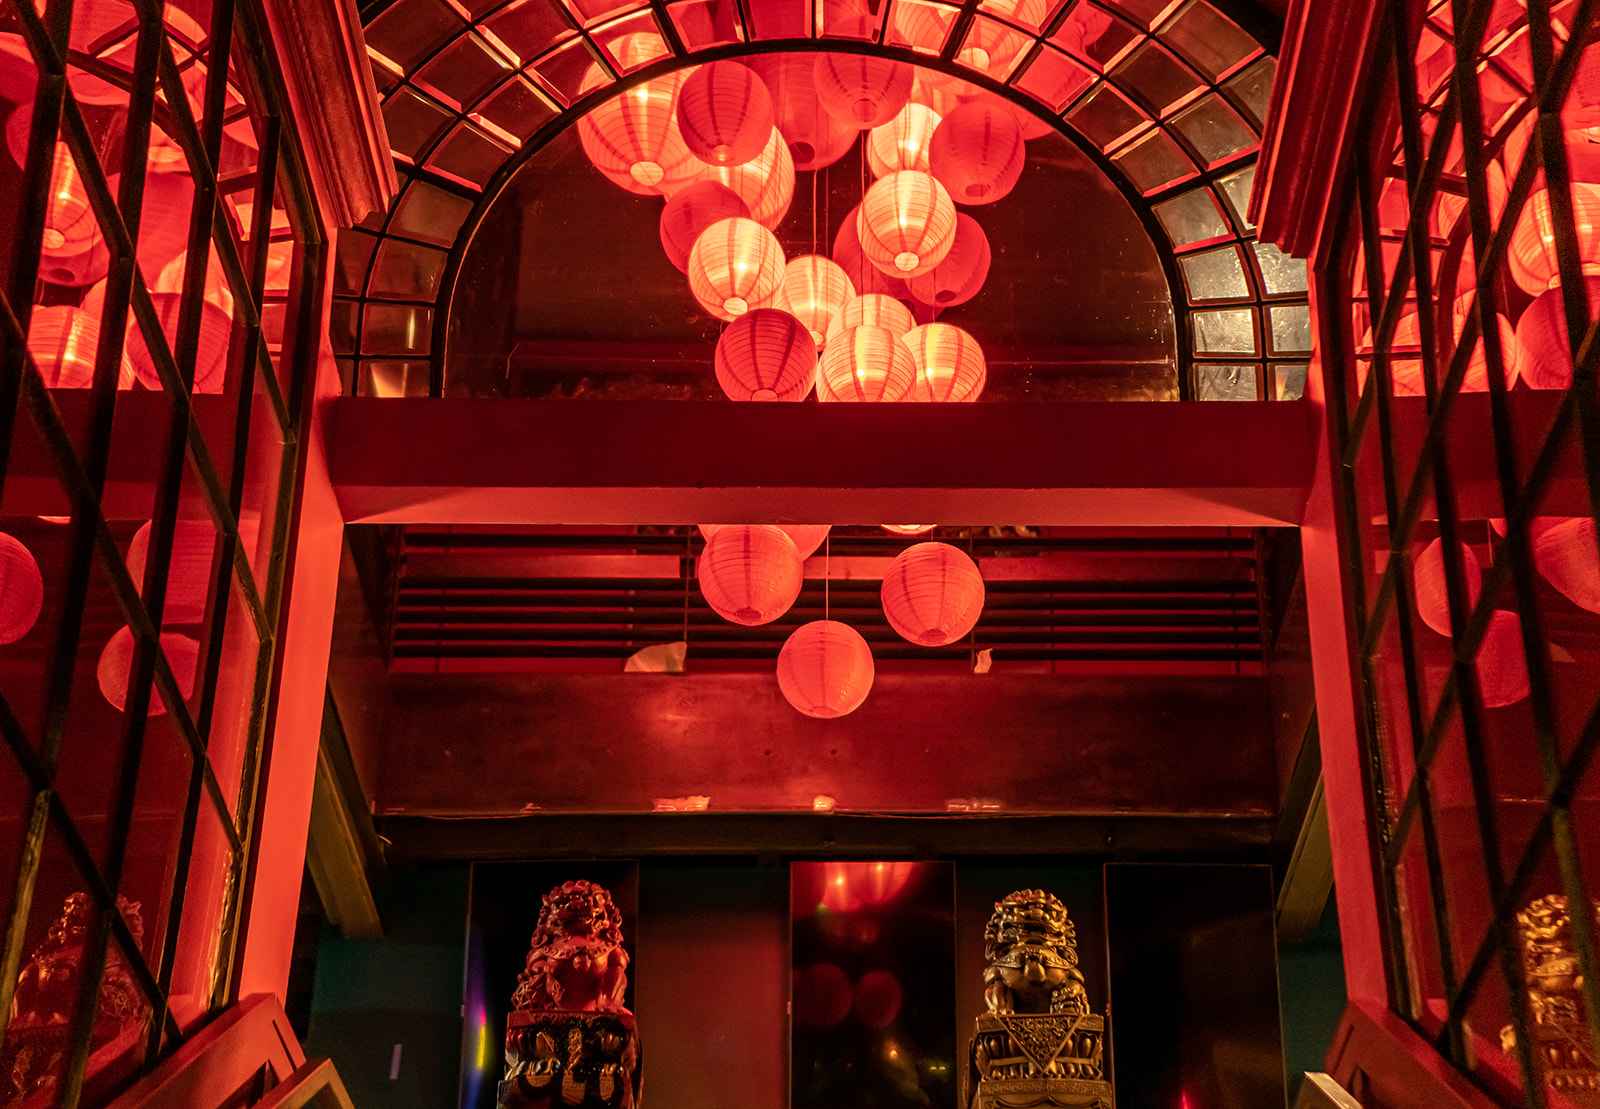 Interior of Bao Brewhouse, which serves baijiu. Two story interior from front door, with gold Chinese lion statues and red paper lanterns.